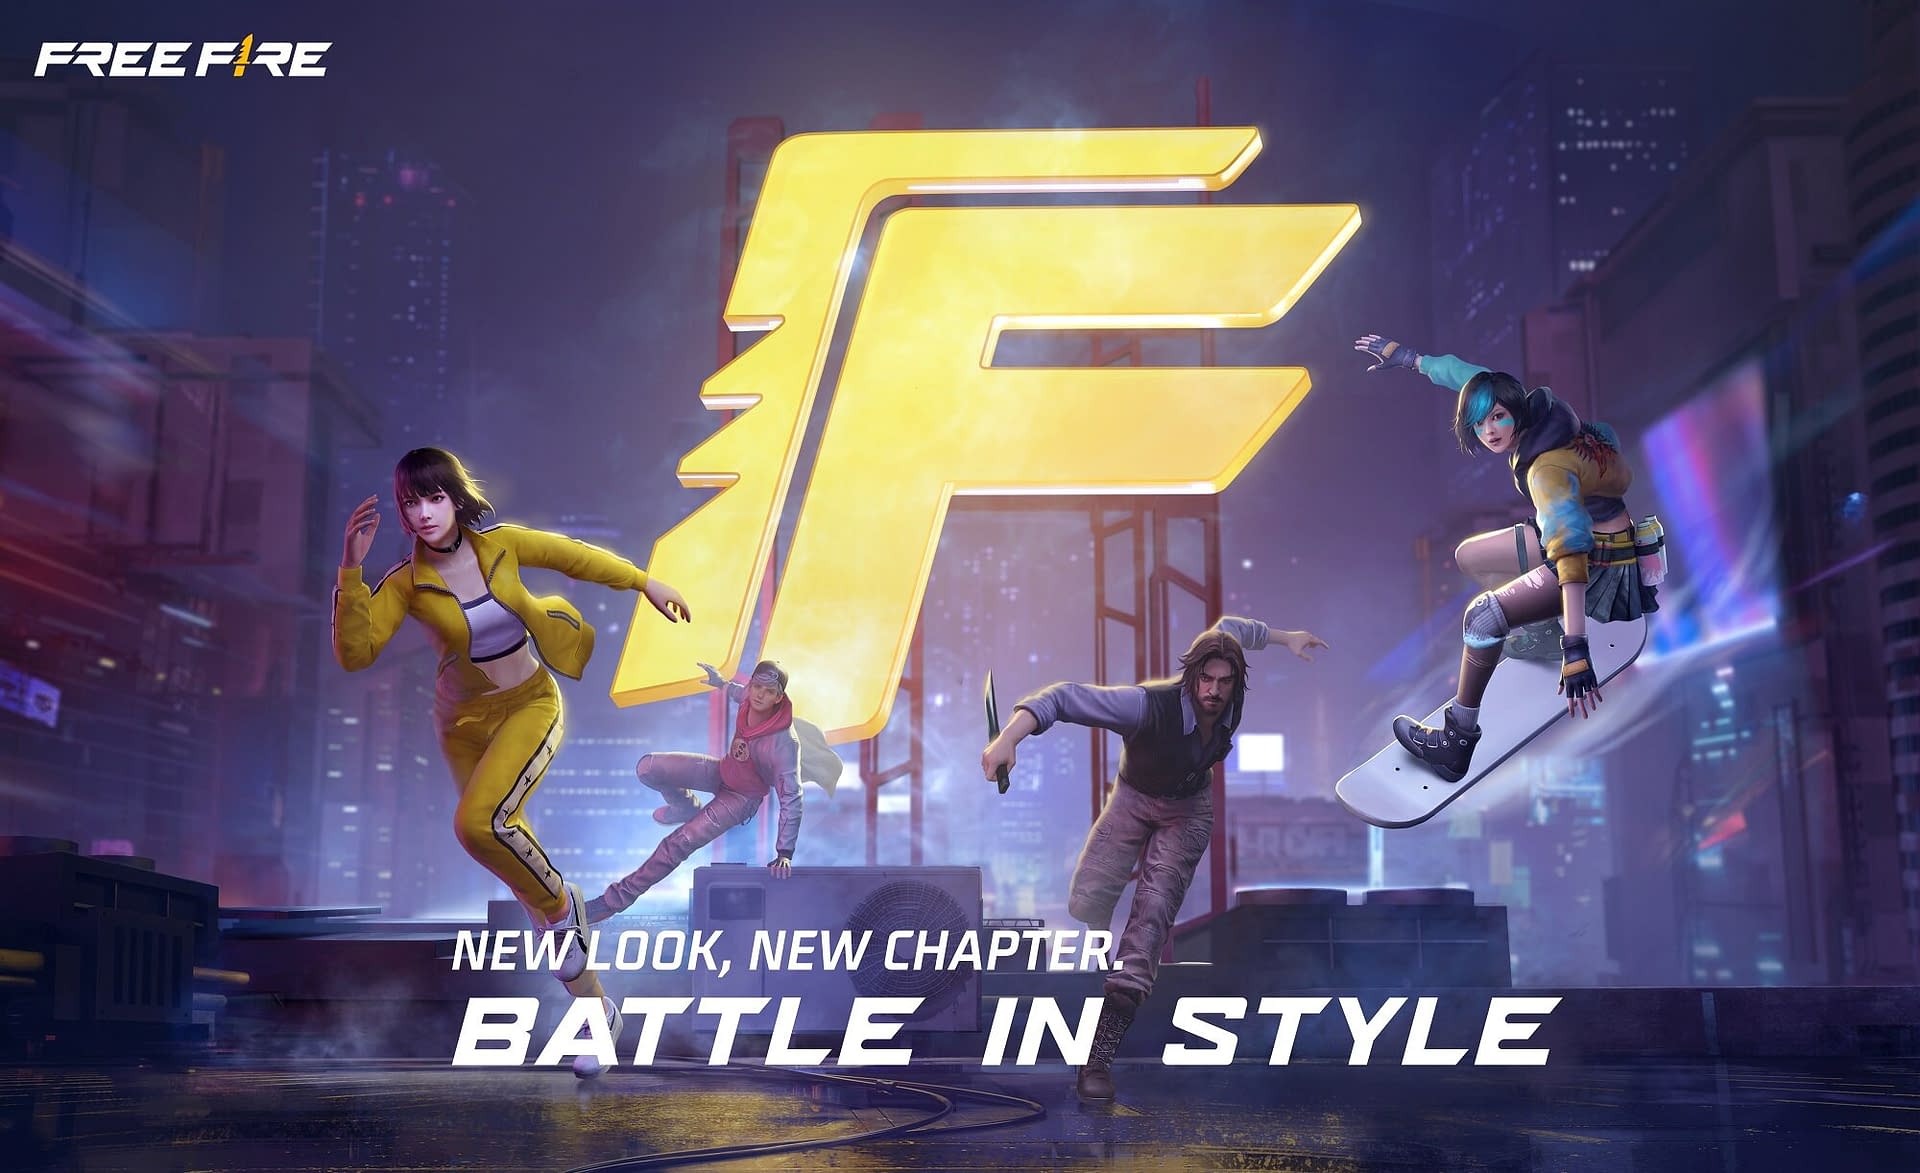 Free Fire Launches New Era With The Second Battle & New Logo